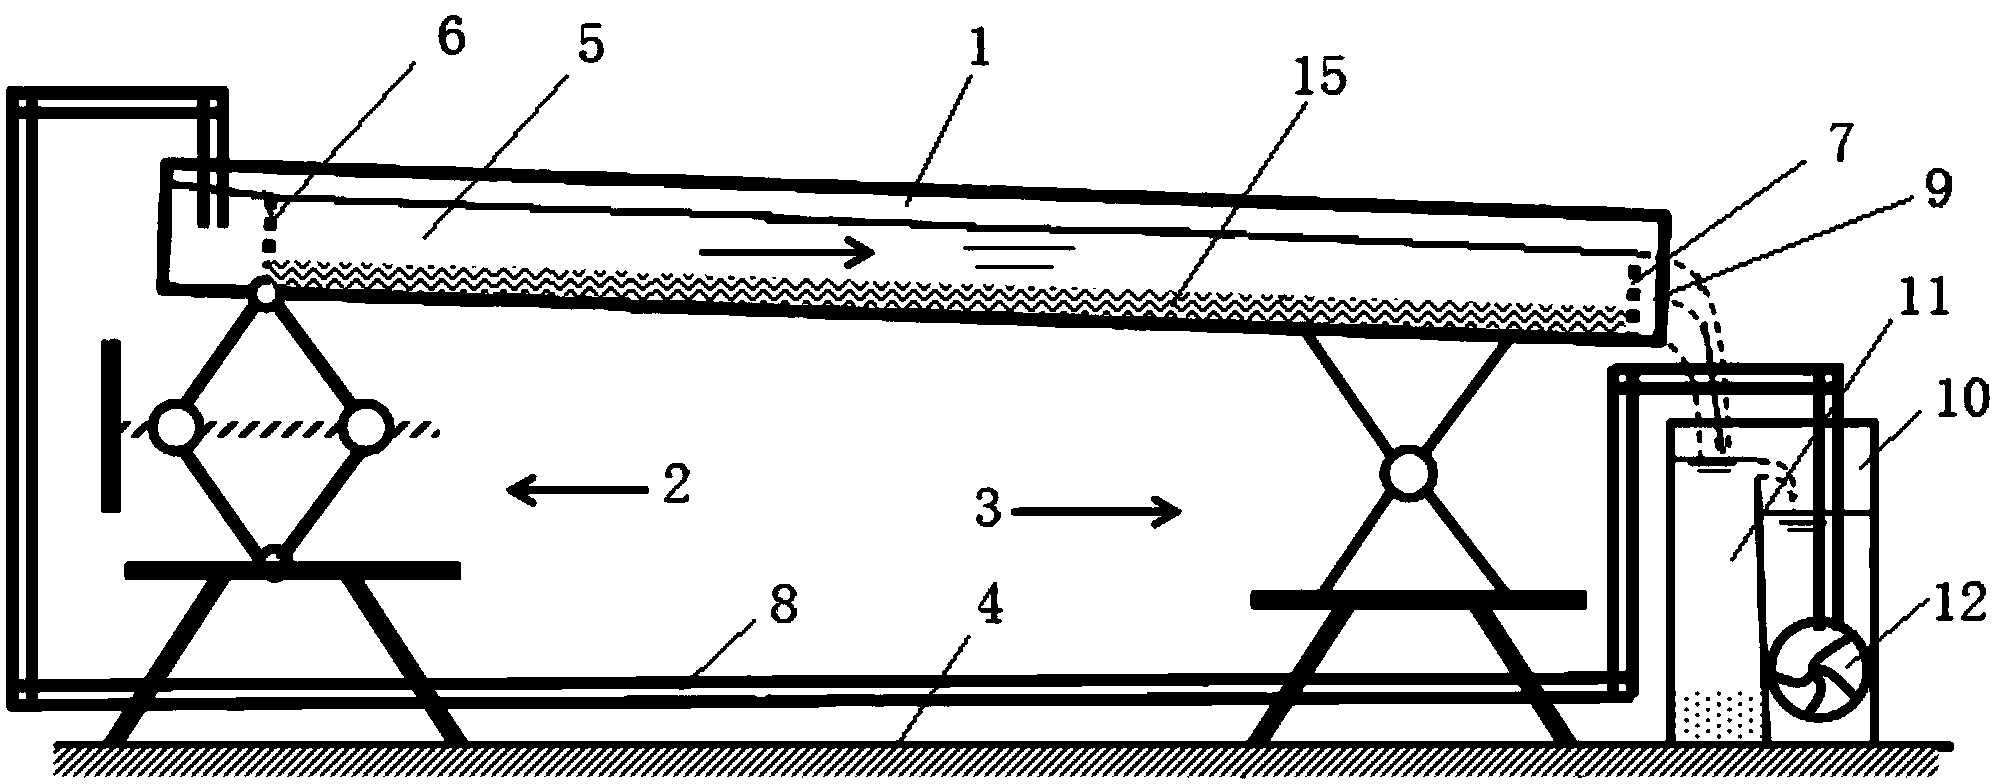 Deformable open channel curve water channel device for water flow silt experiment